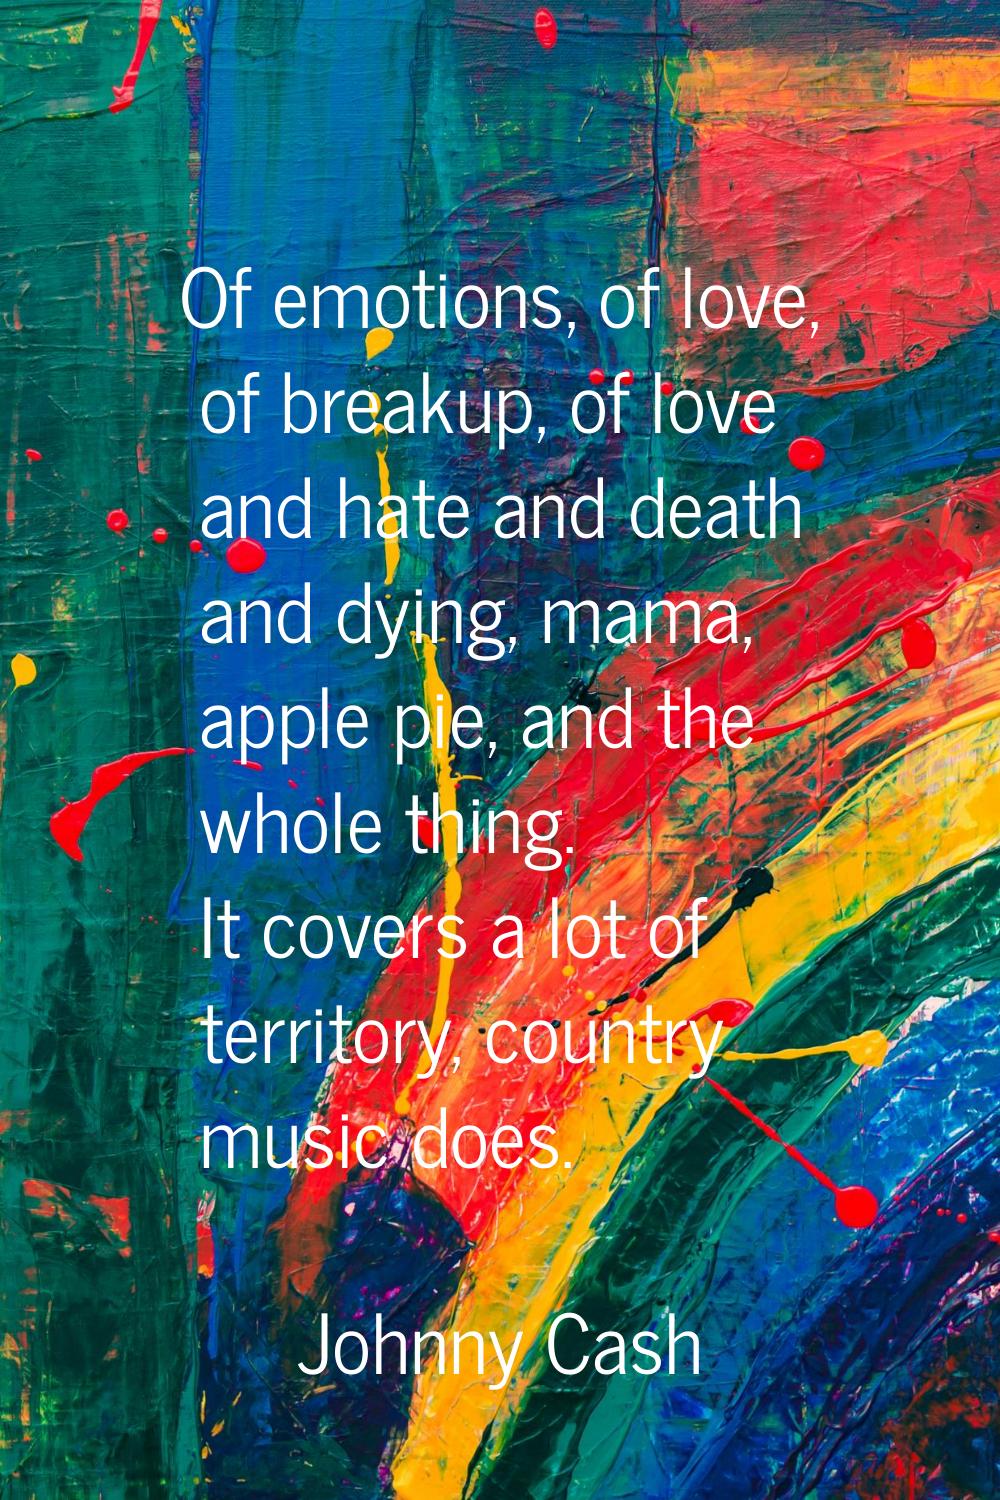 Of emotions, of love, of breakup, of love and hate and death and dying, mama, apple pie, and the wh